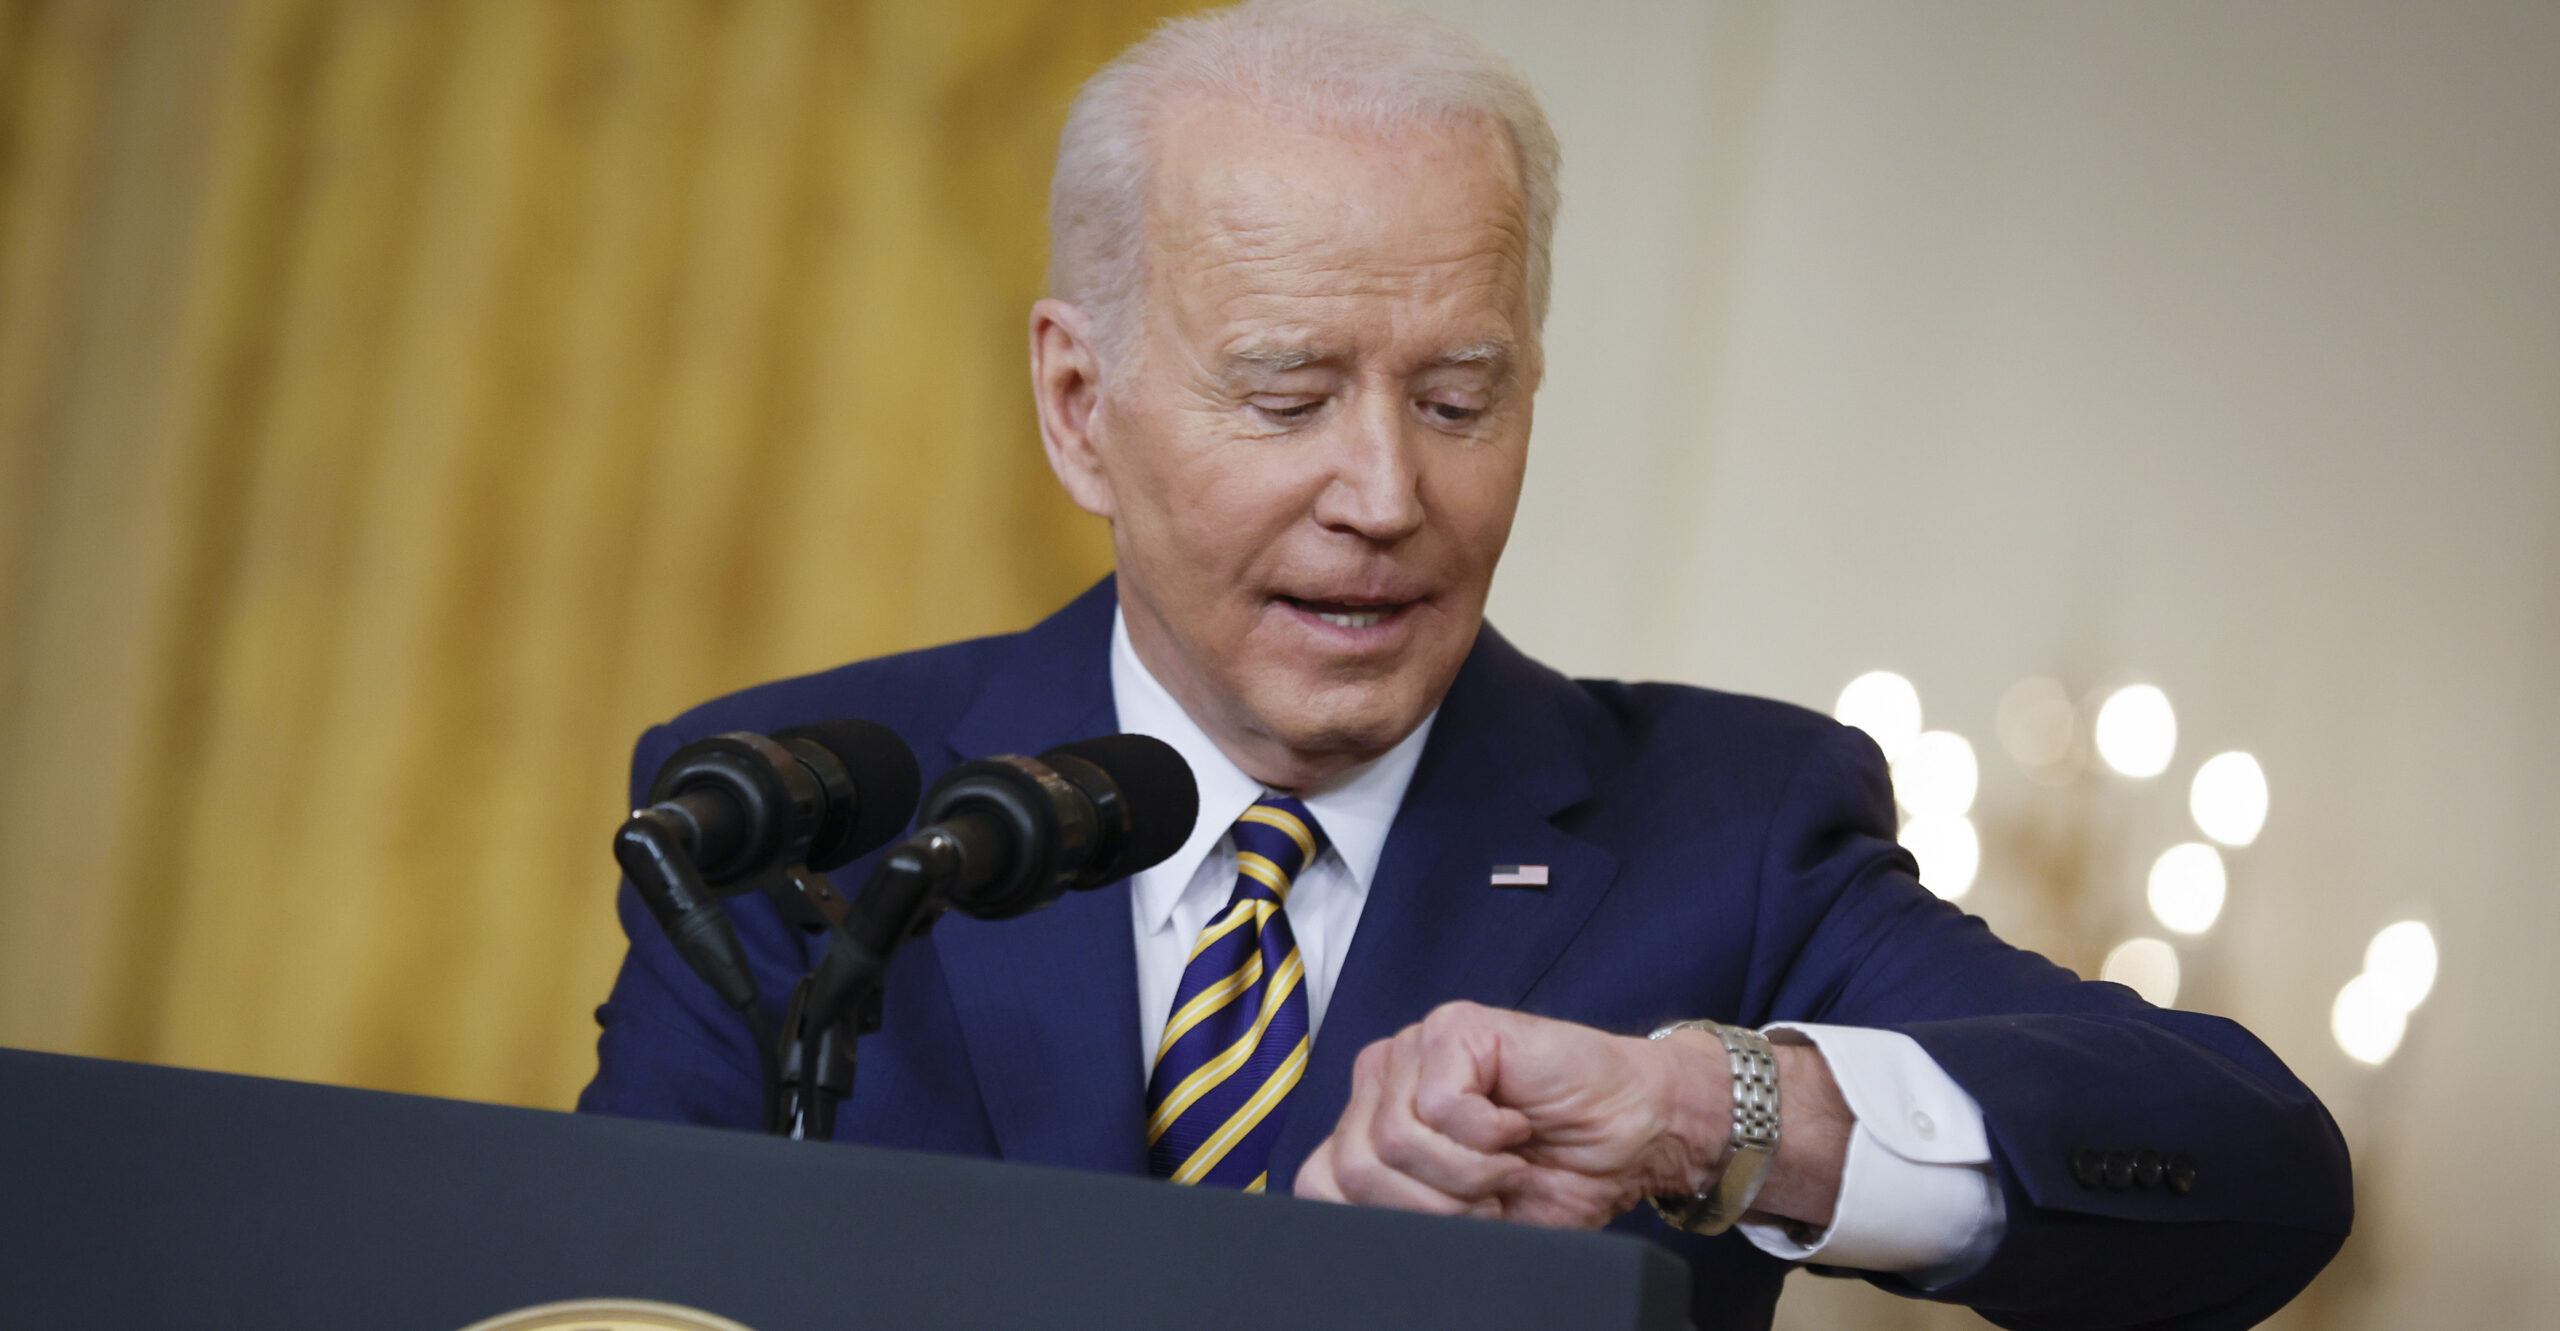 8 Takeaways From Biden's First Press Conference of 2022